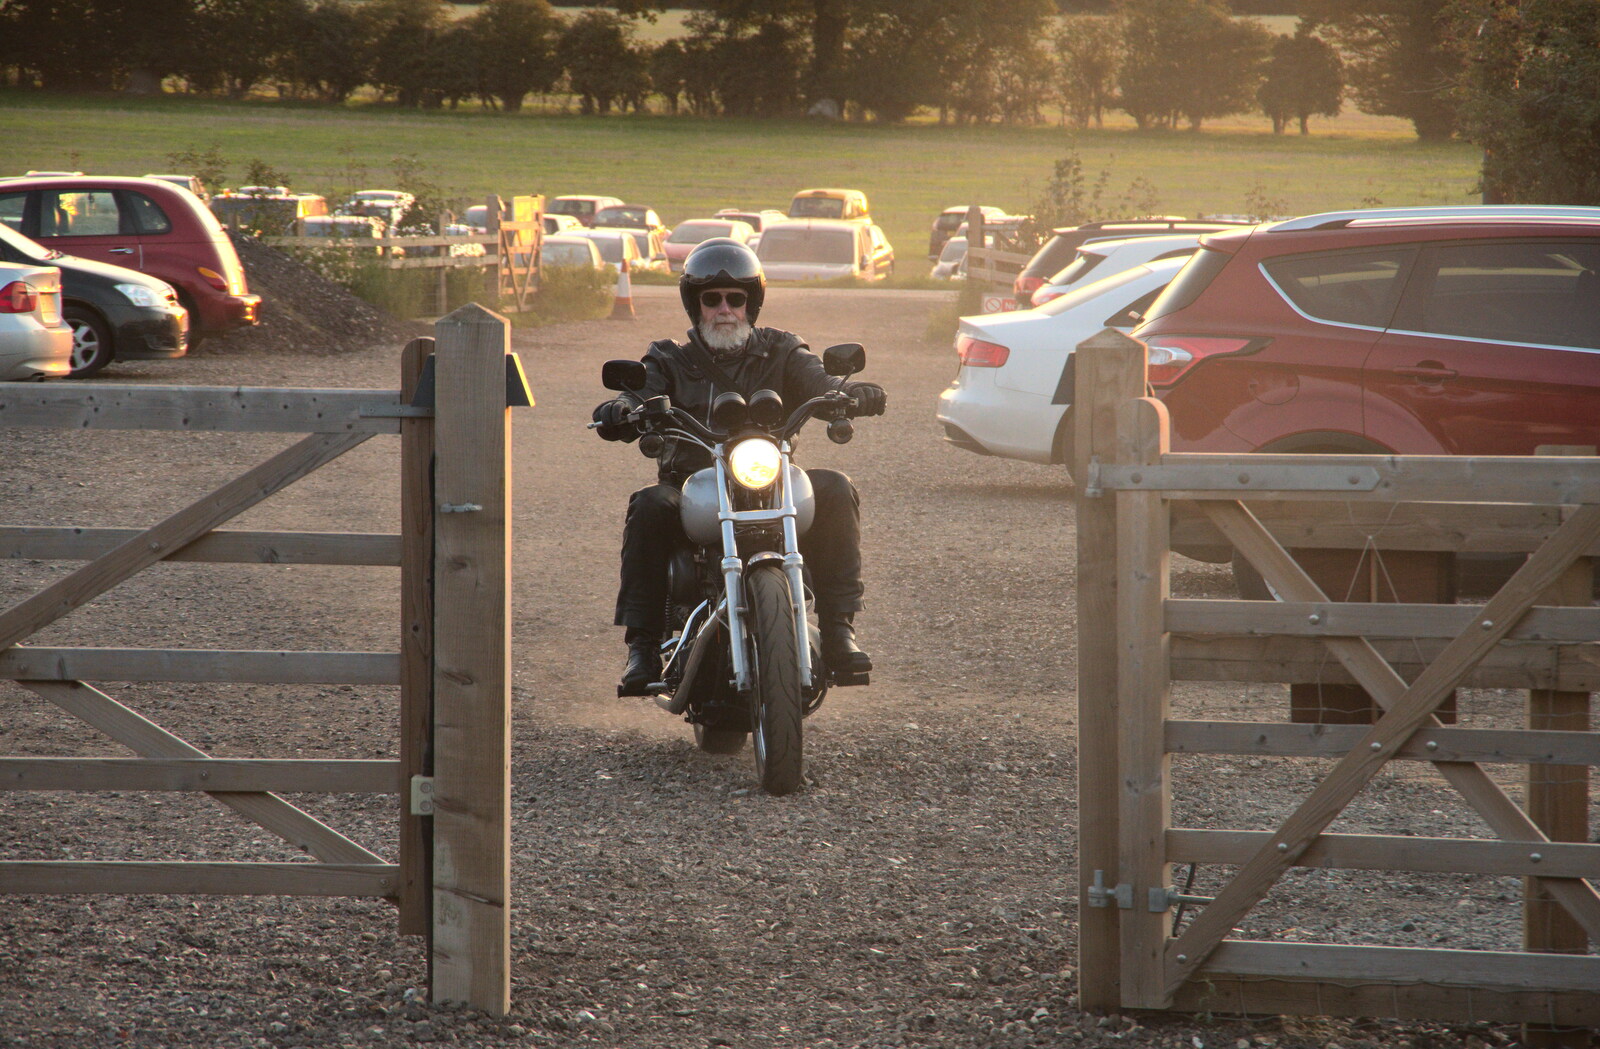 A bloke on a motorbike makes a dusty entrance from Star Wing's Hops and Hogs Festival, Redgrave, Suffolk - 12th September 2020